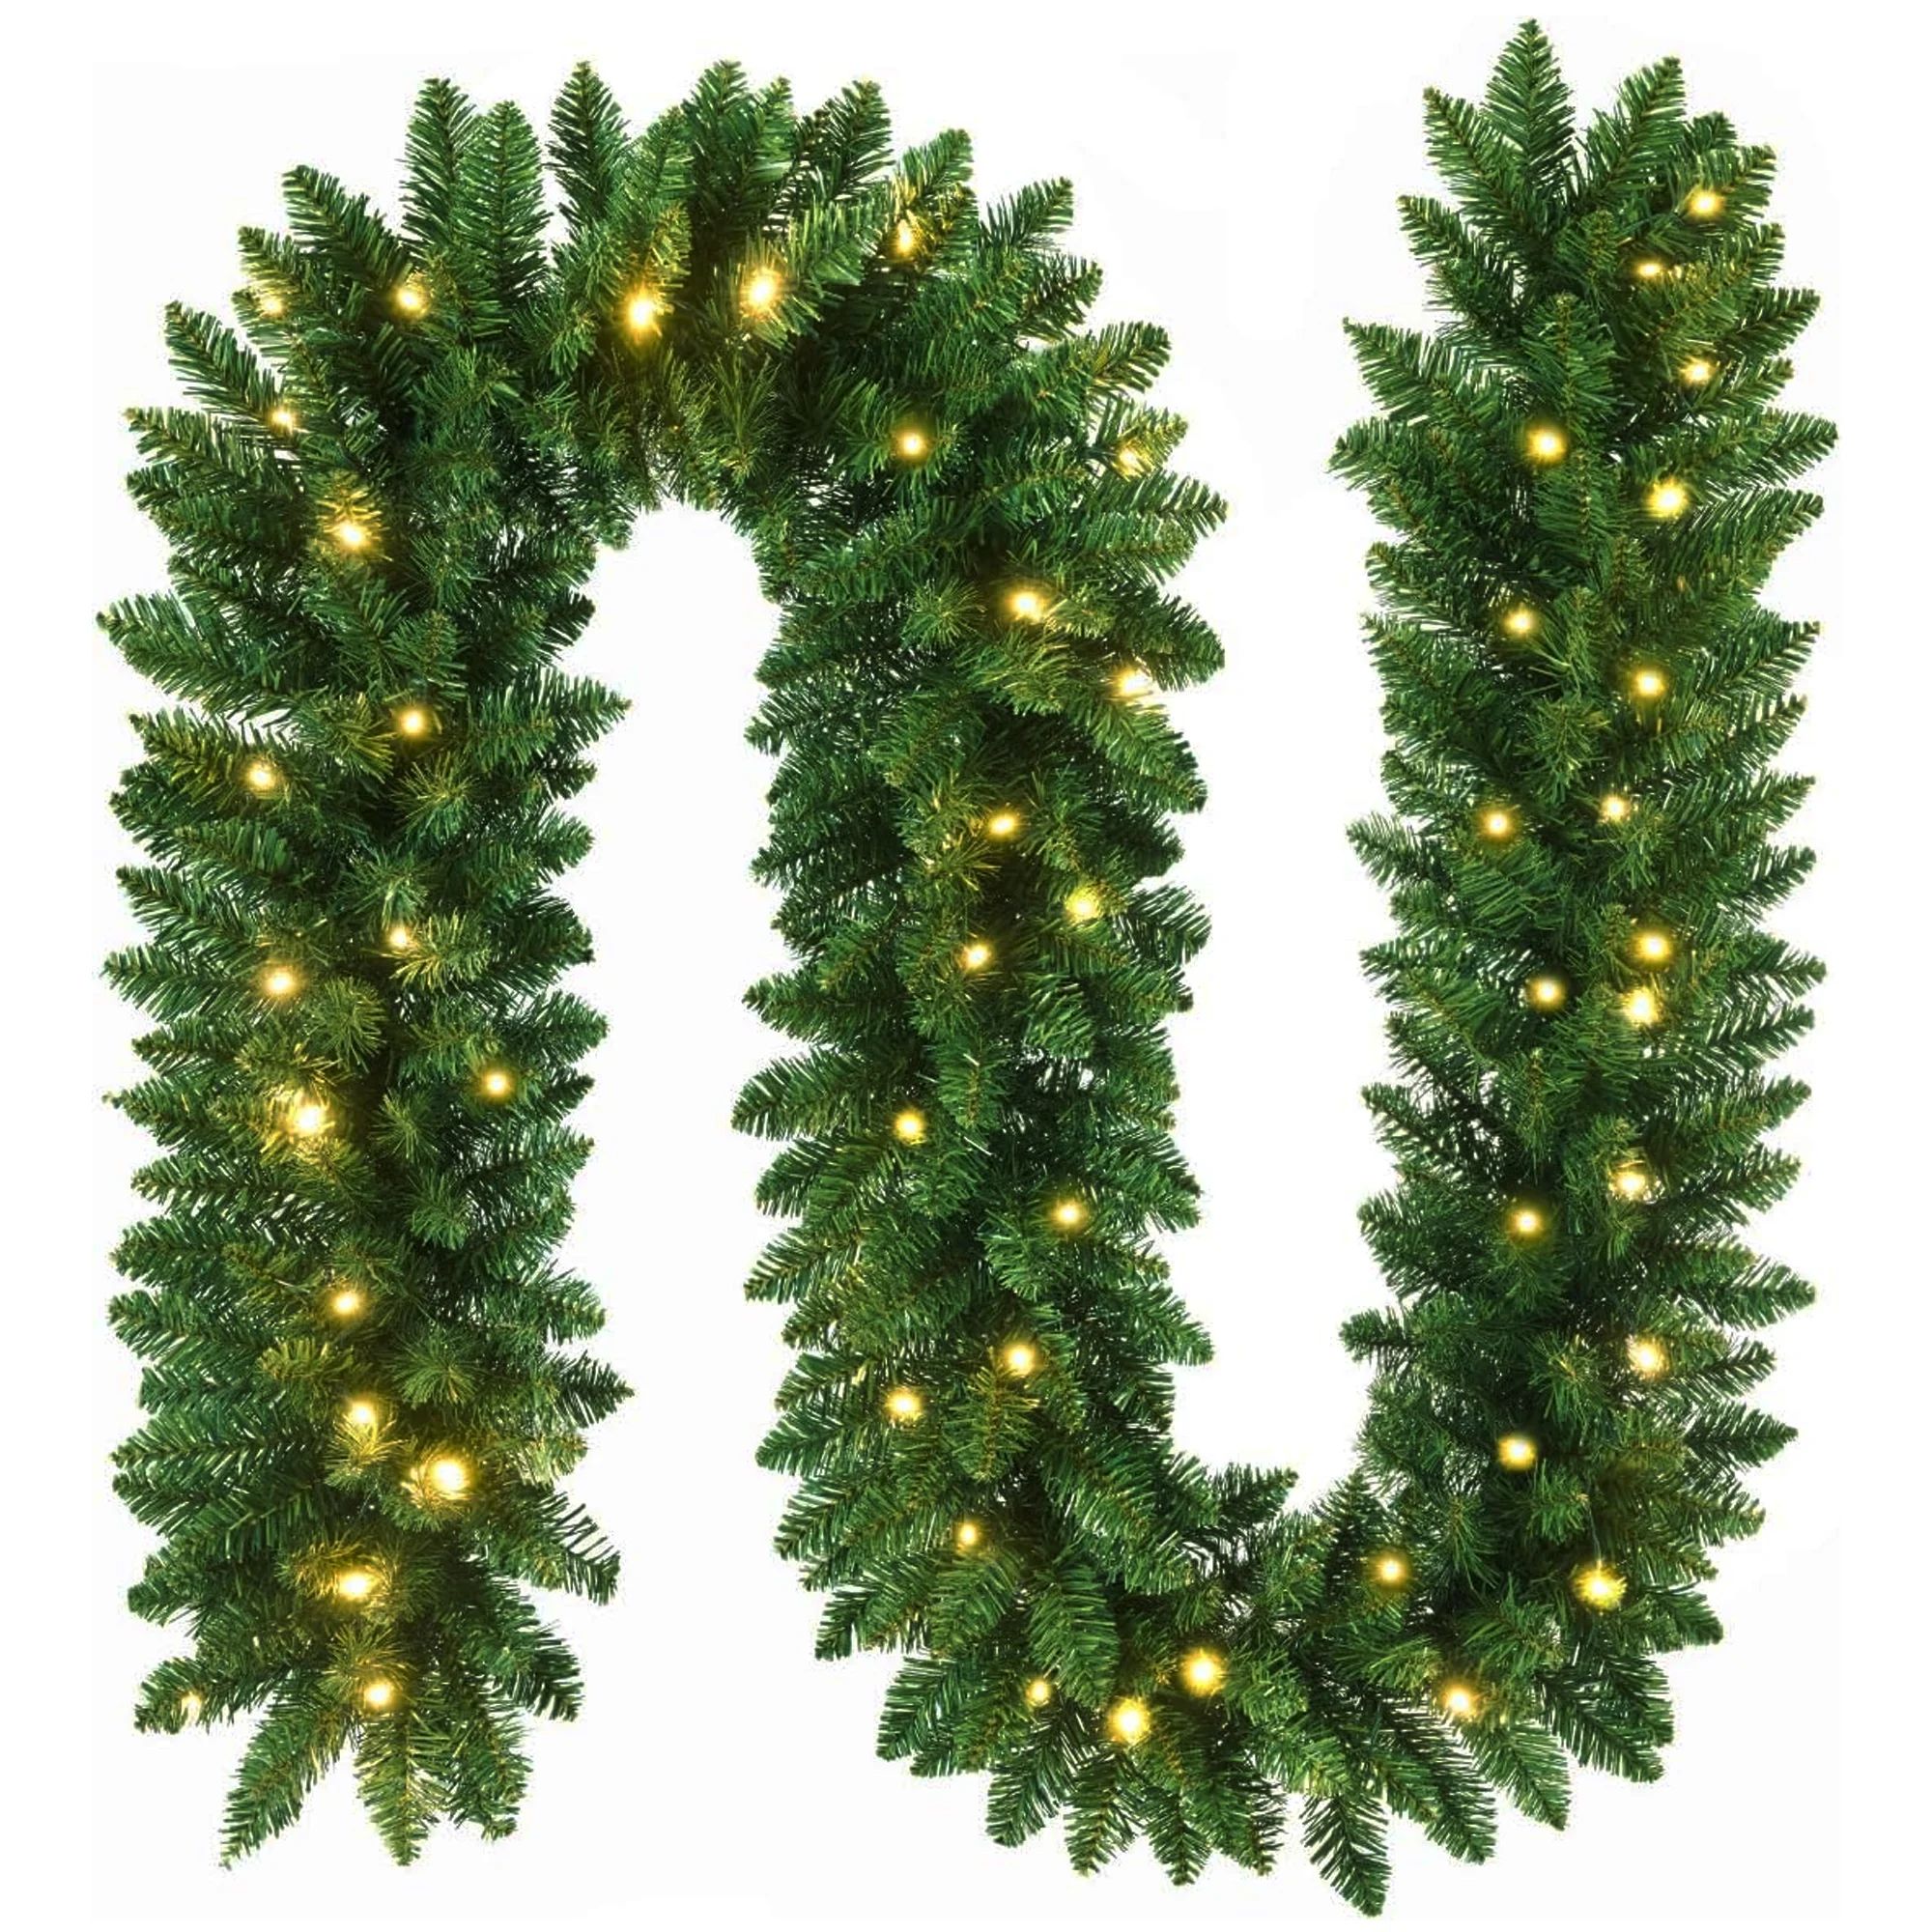 Longrv 9ft Pre-lit Christmas Garland 300 Branches Artificial Xmas Decoration Garland with 50 LED ... | Walmart (US)